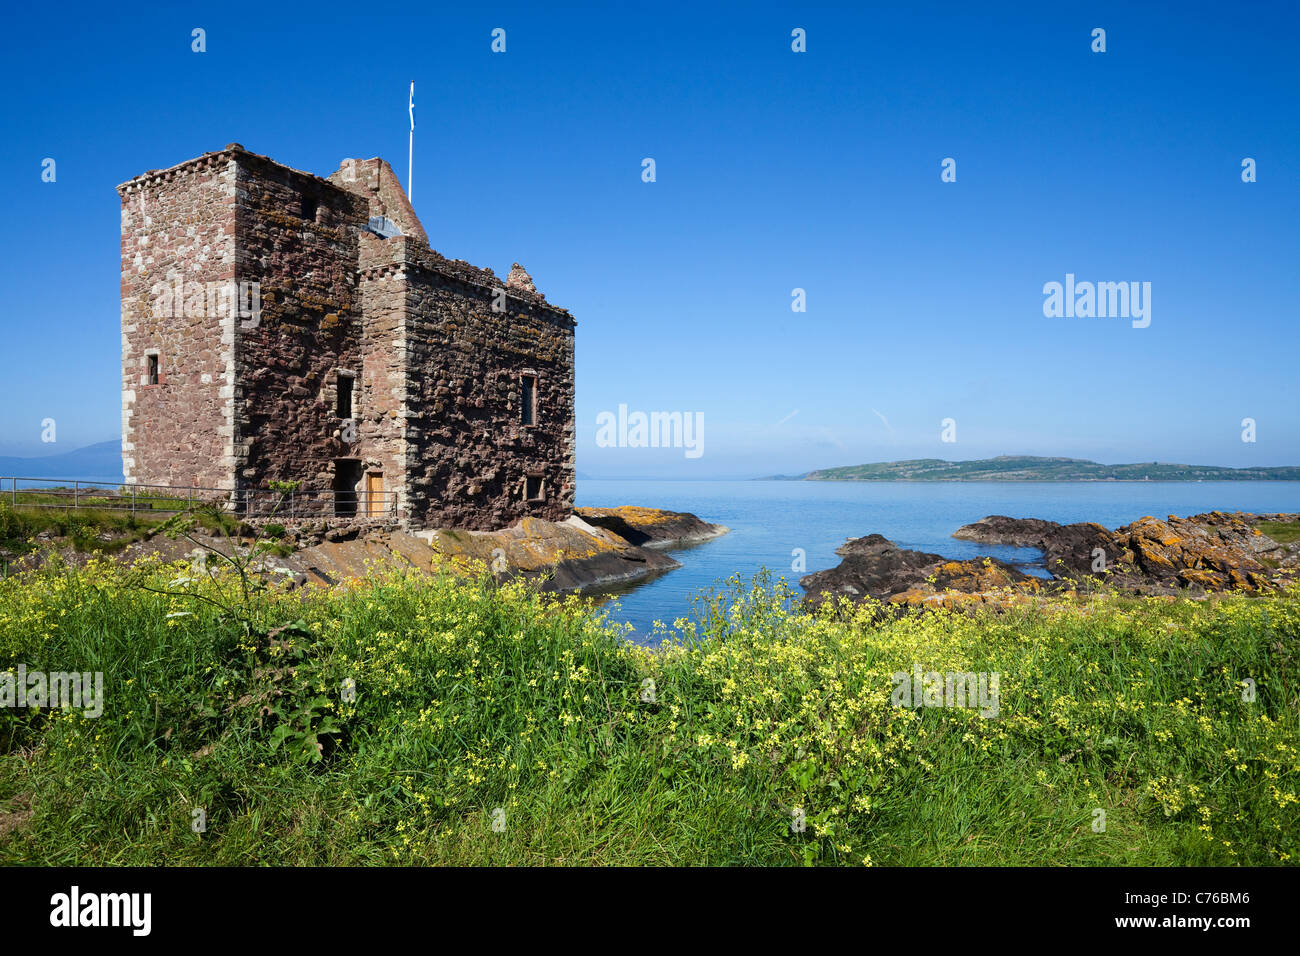 Portencross castle, with a view across the Firth of Clyde to the Island of Little Cumbrae, Ayrshire Scotland, UK, Great Britain Stock Photo